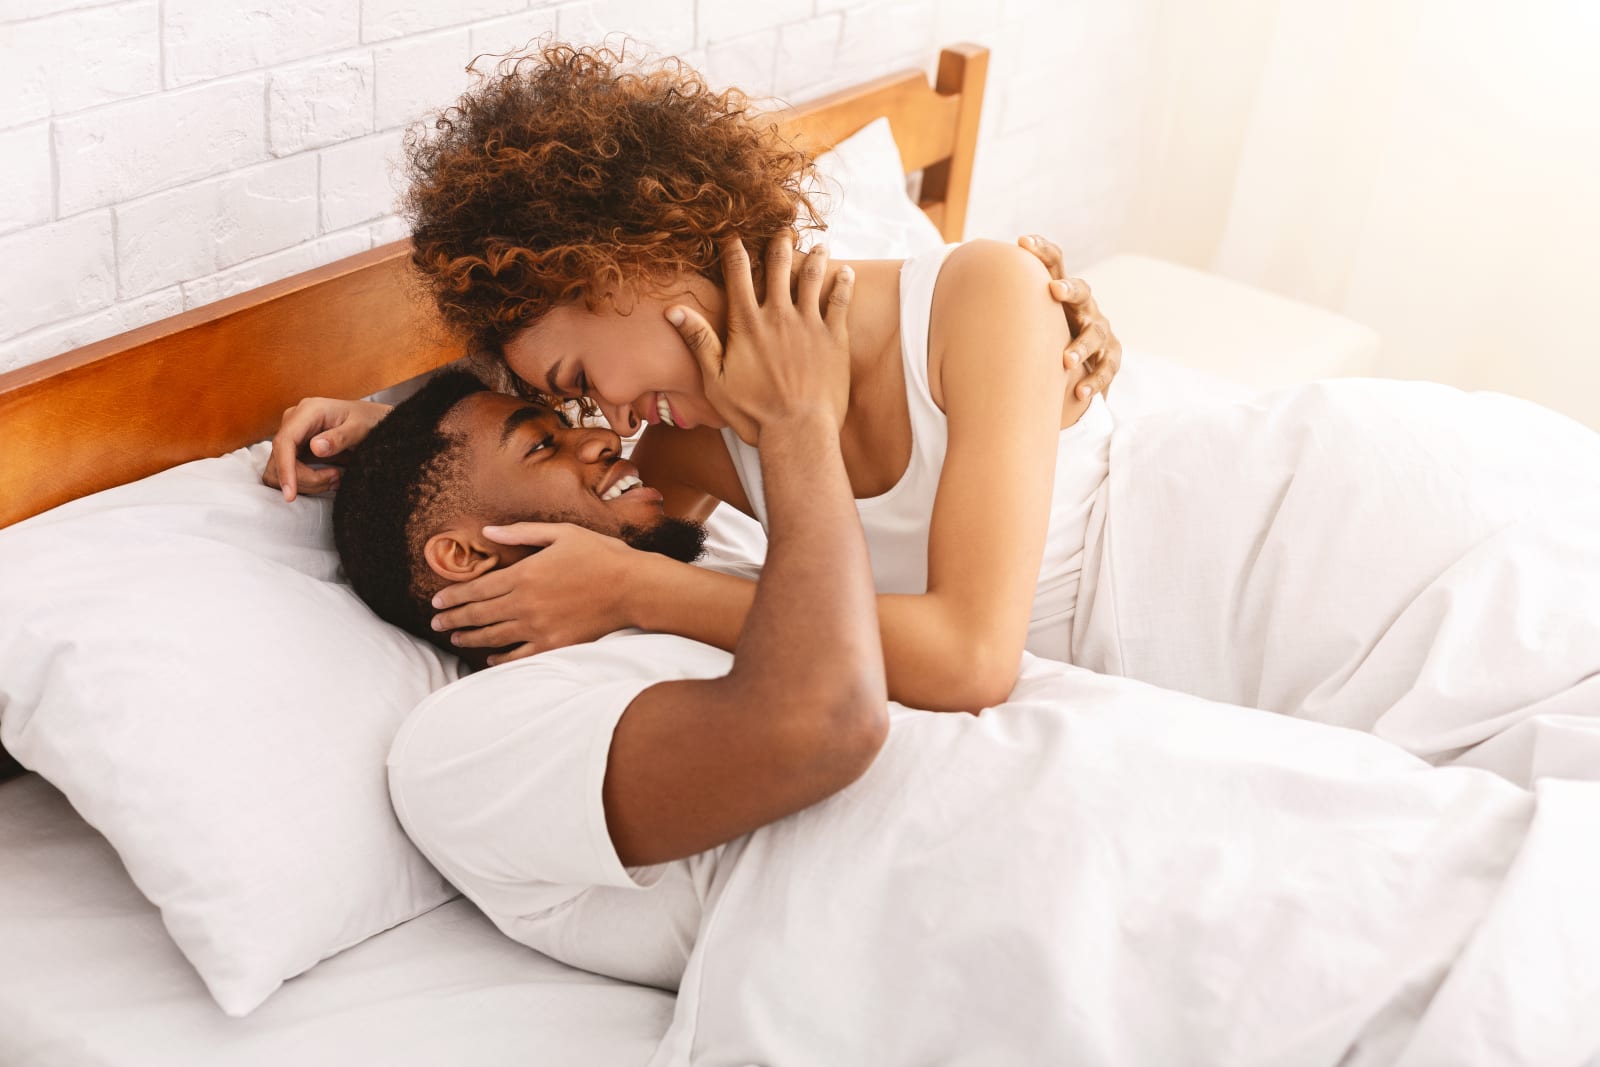 Image of a couple in bed